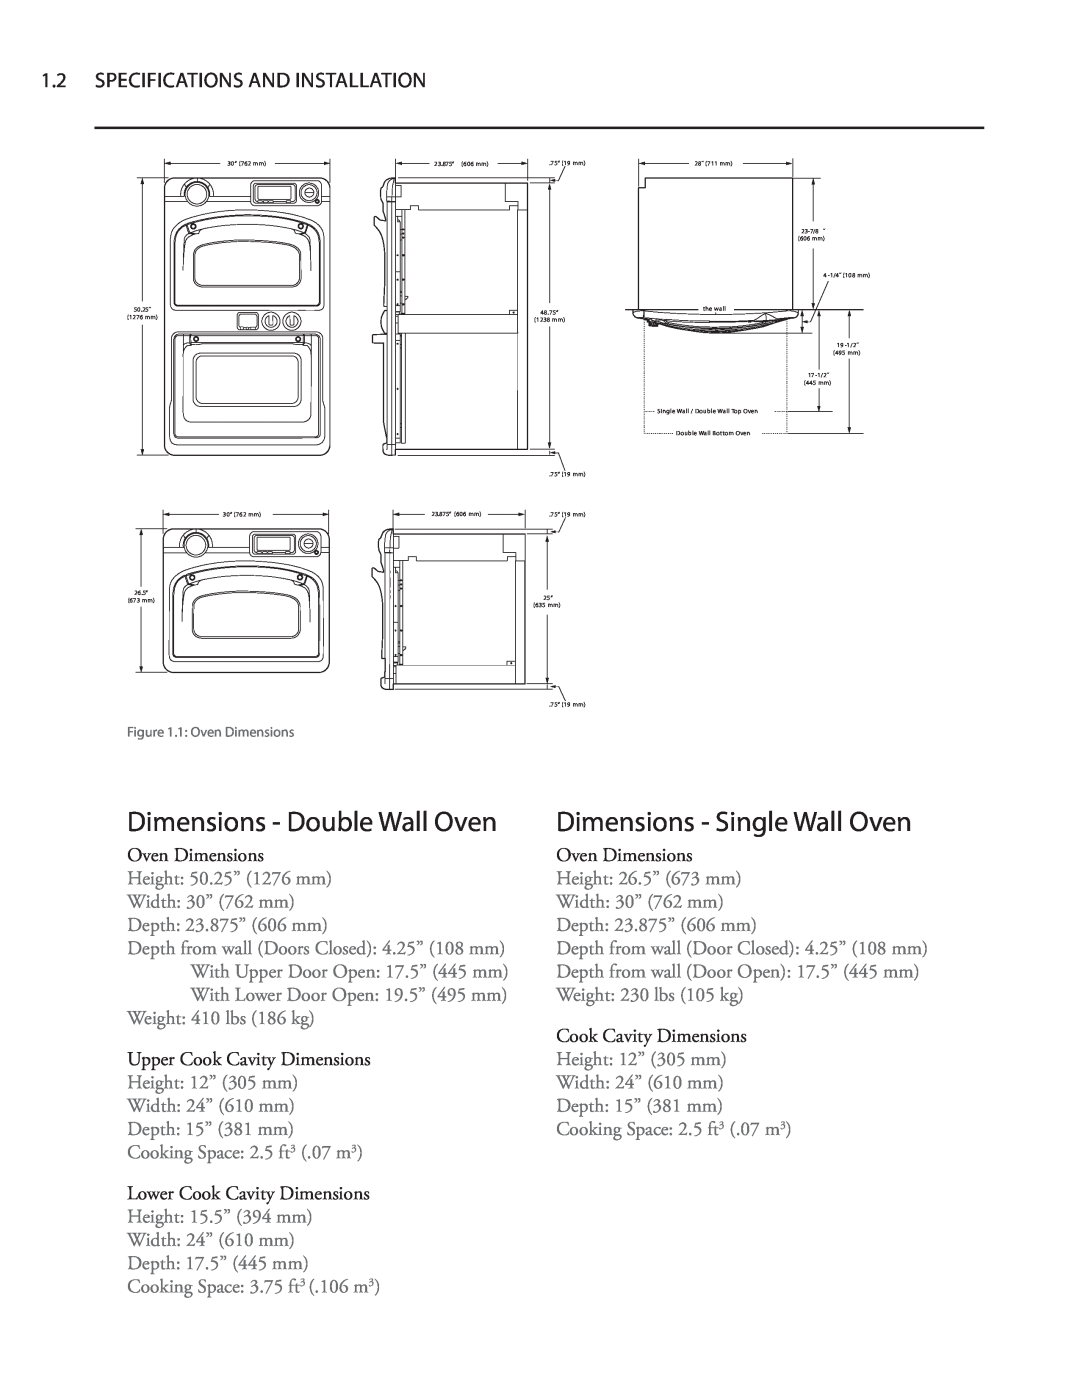 Turbo Chef Technologies Residential Single and Double Wall Oven service manual Dimensions - Double Wall Oven 